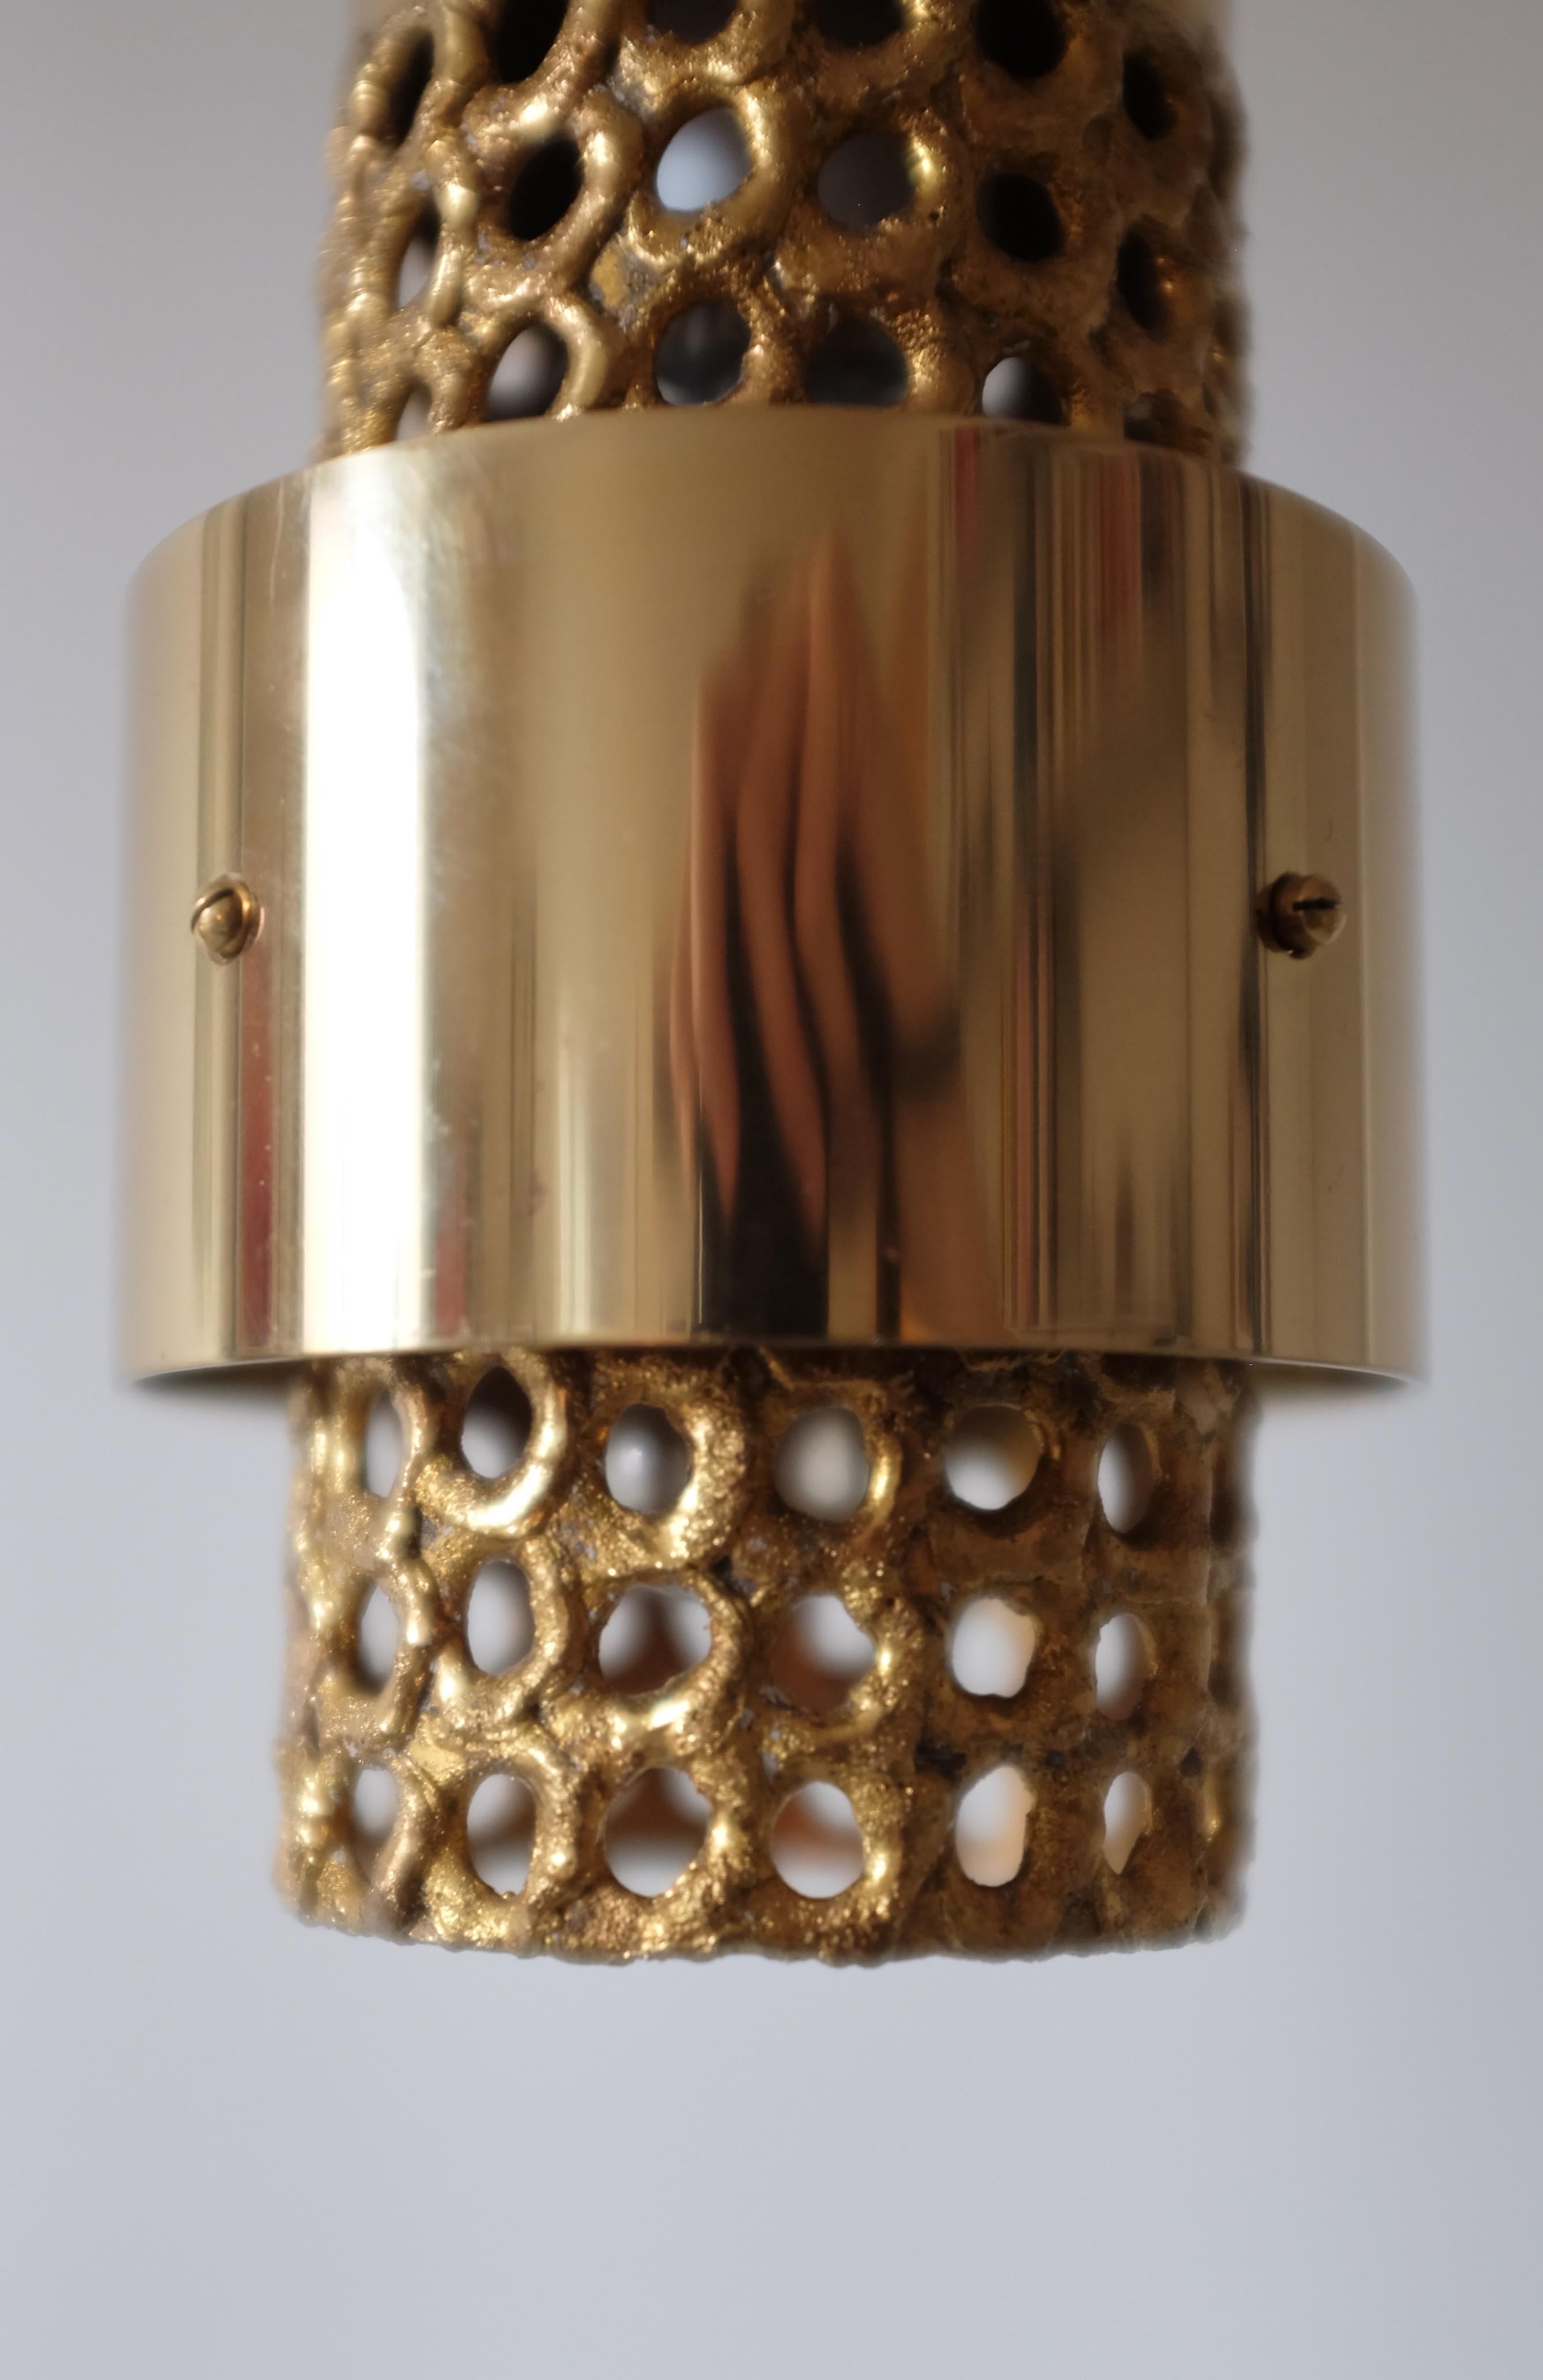 Perforated brass pendant by Pierre Forssell for Skultuna, Sweden. Originally designed in the 1960s this is one of the iconic lamp and lantern models that Forssell designed during his active years at Skultuna during the 1960-80s. Using a flamed torch